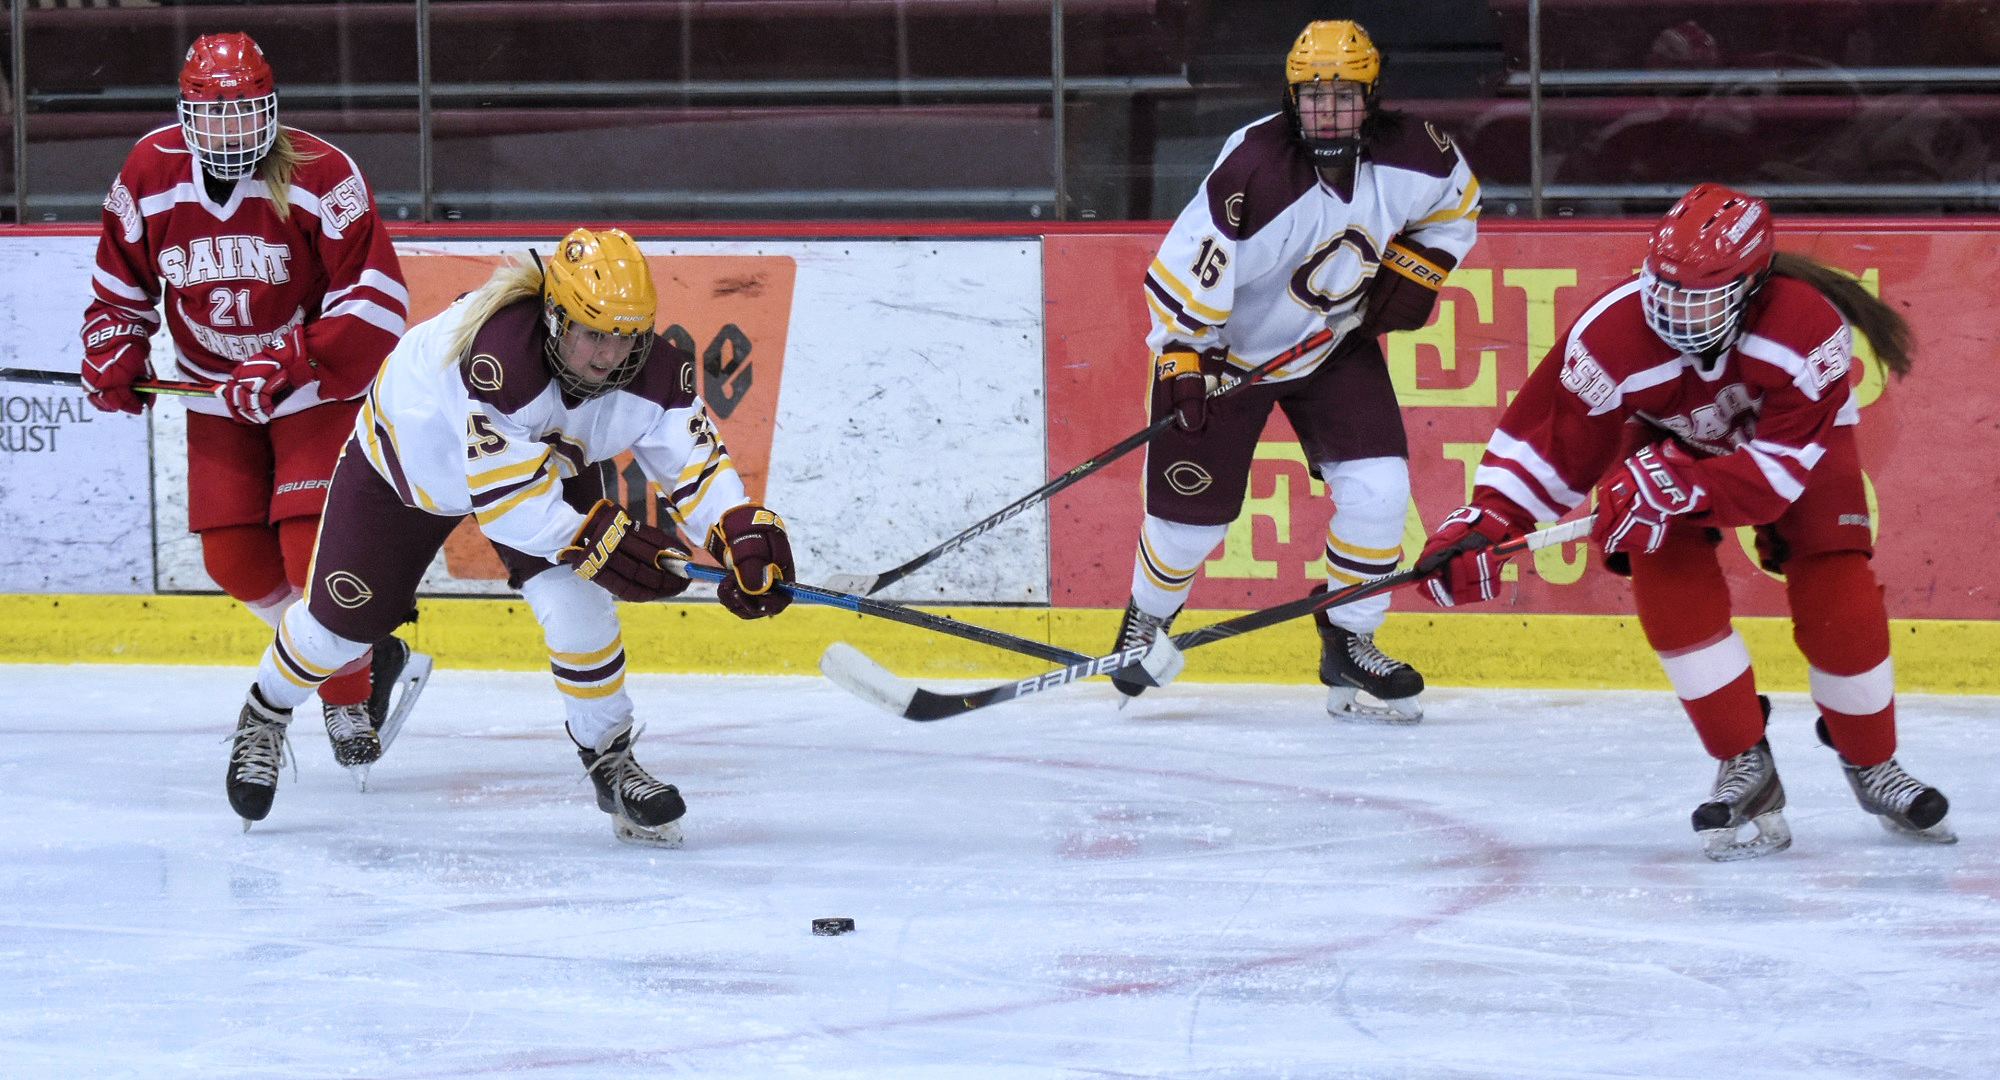 Anna Ballweber (#25)  goes after the puck while teammate Brenna Mjoness looks on. The two combined for the Cobbers' first goal in the 2-1 win over St. Benedict.